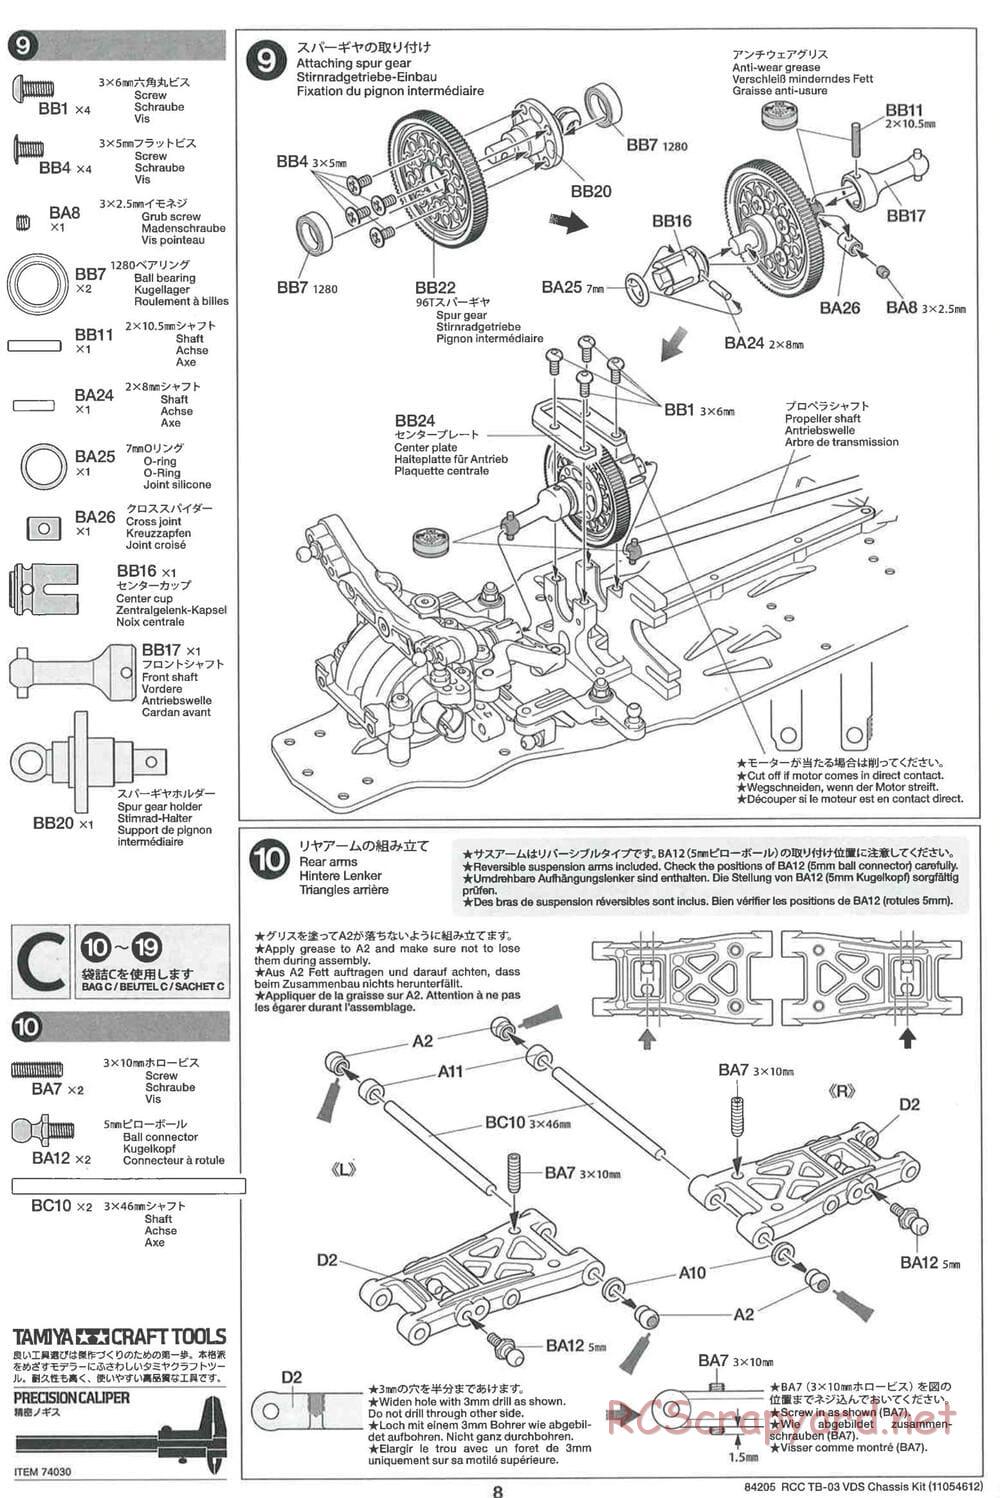 Tamiya - TB-03 VDS Drift Spec Chassis - Manual - Page 8